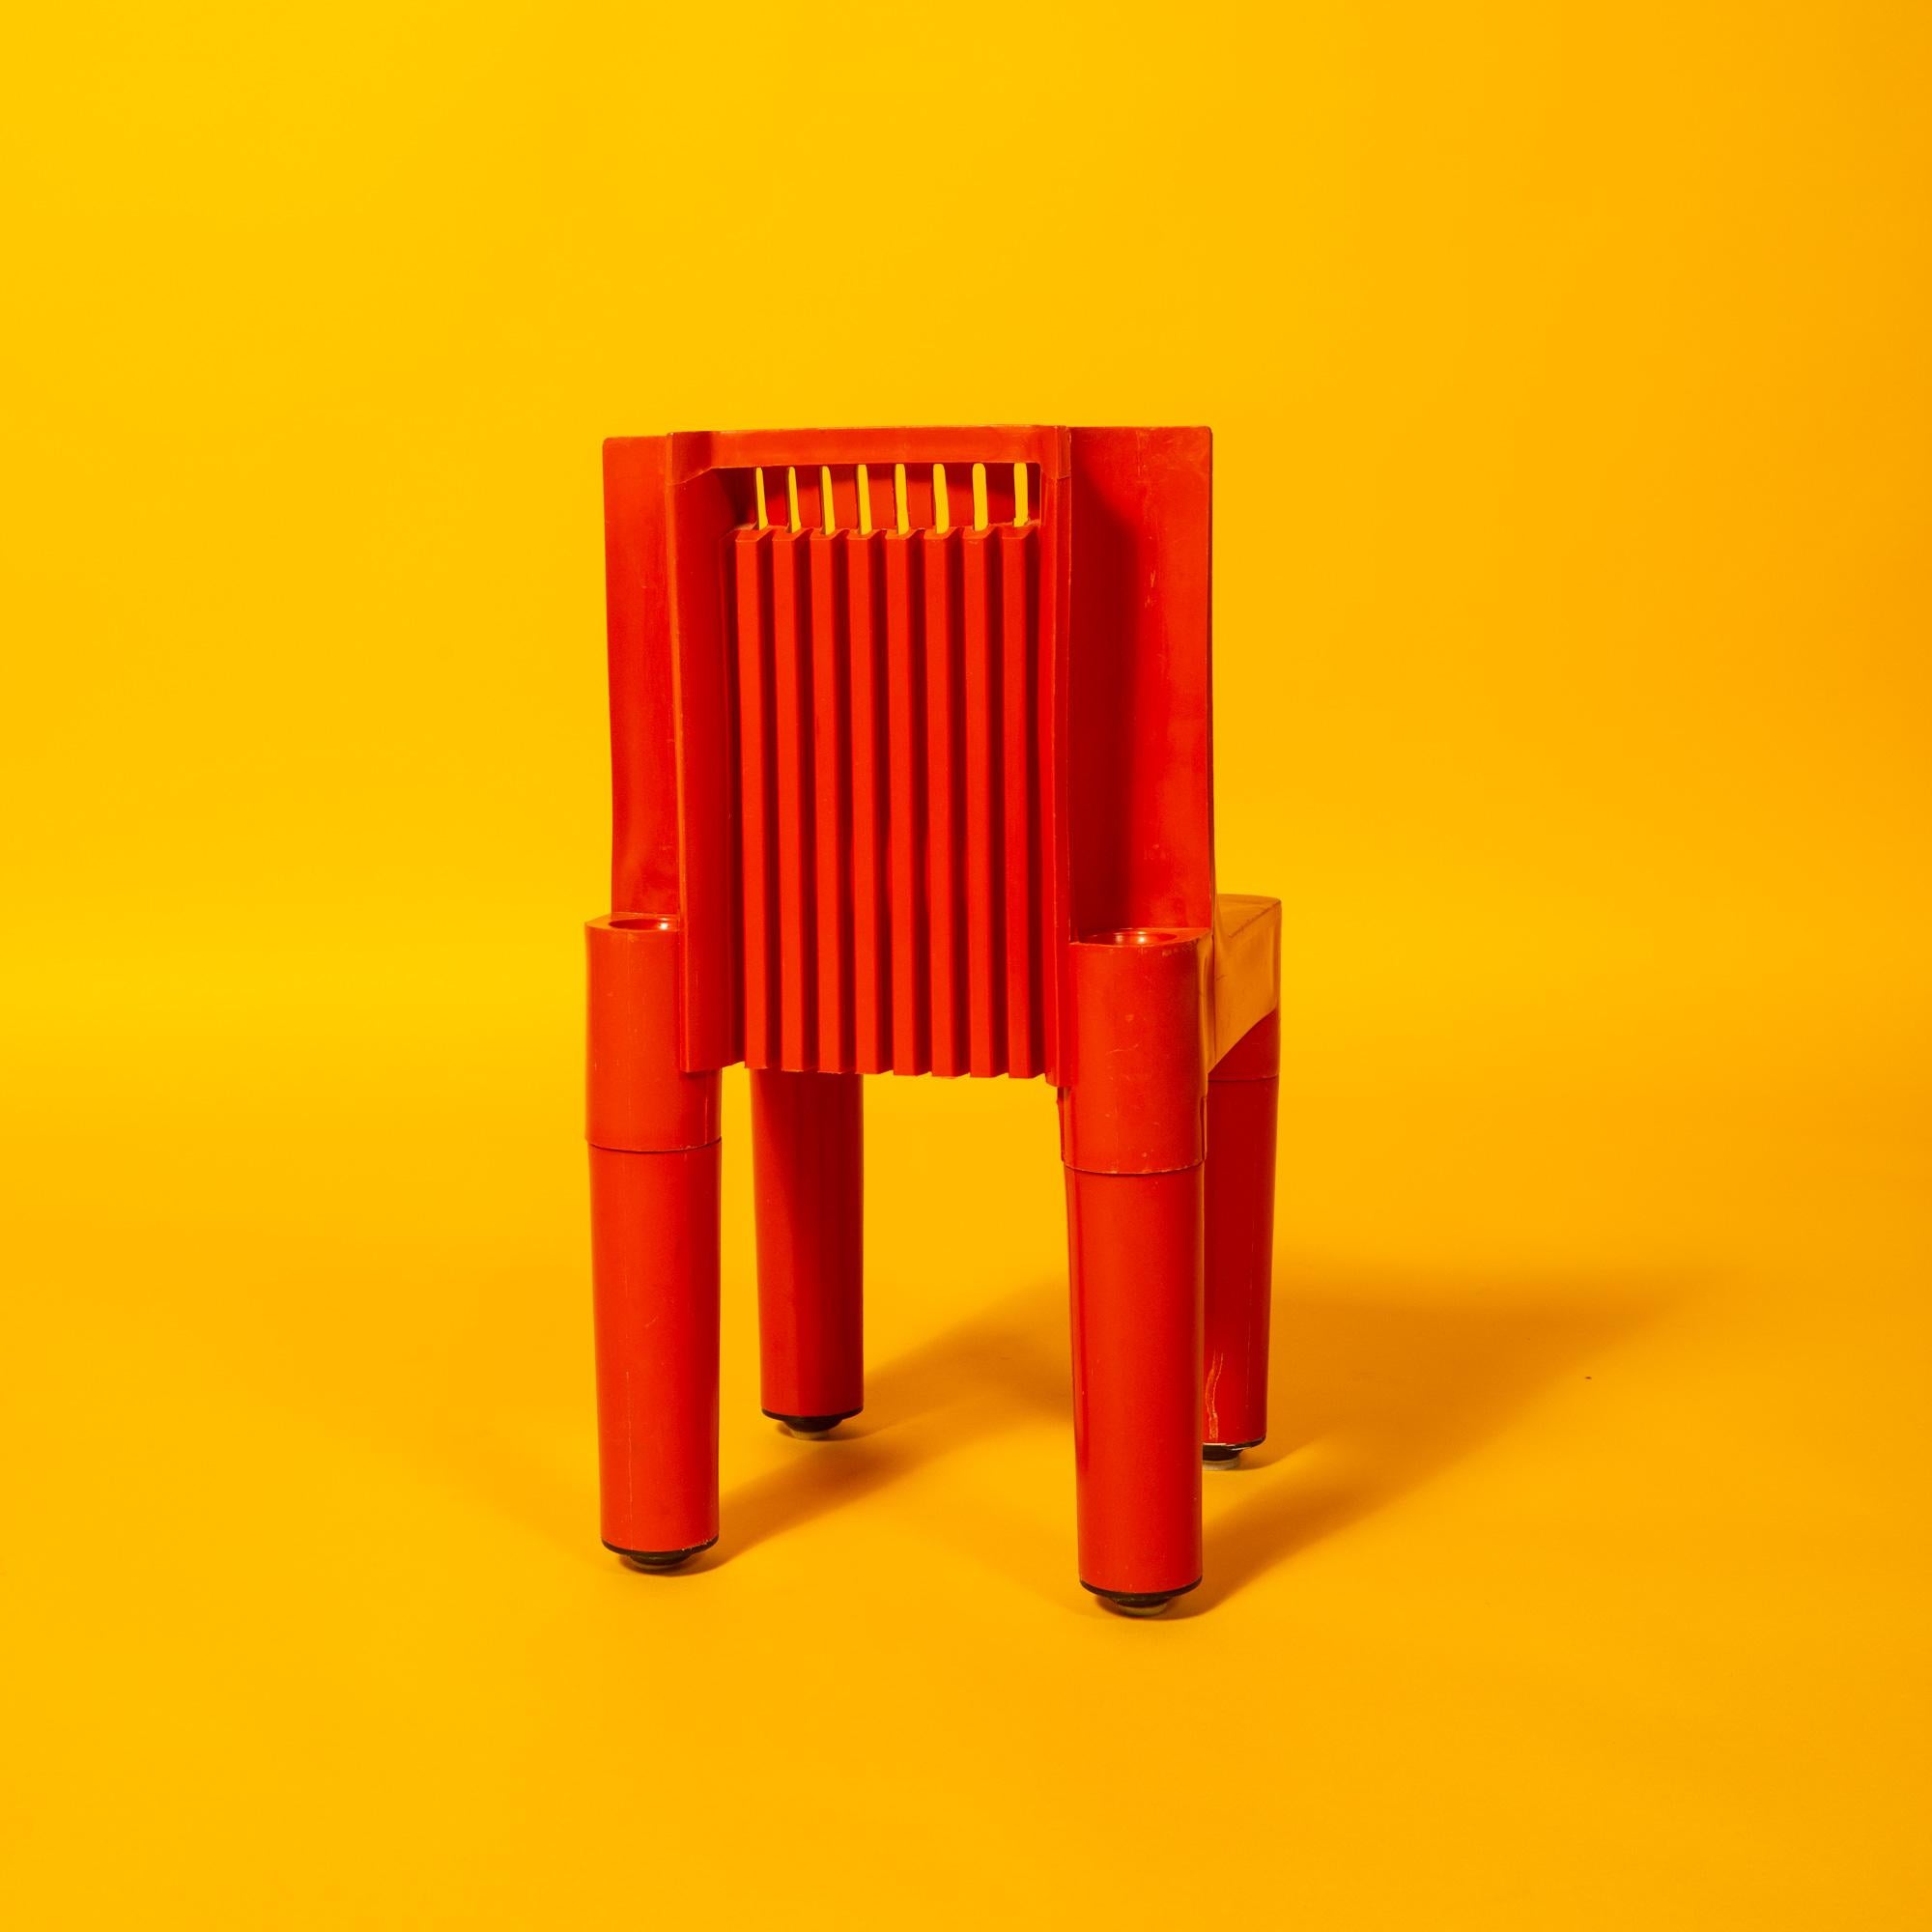 Officially known as K4999 designed by Richard Sapper and Marco Zanuso for Kartell, these chairs represent the first structural application of polyethylene plastic in furniture. The chairs were designed with the intent of being both a functional